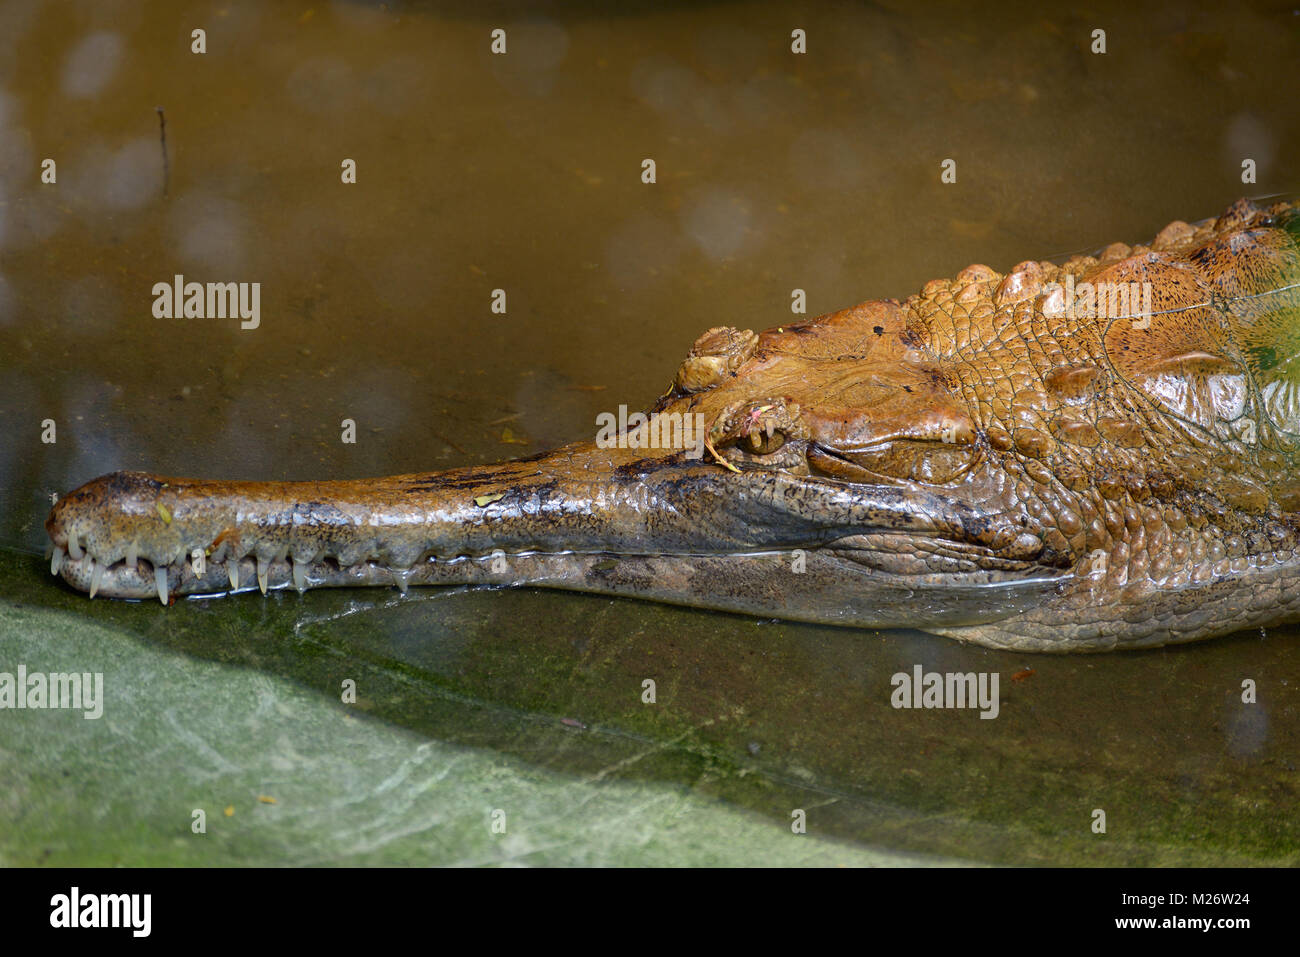 False gharial lies in the pond Stock Photo